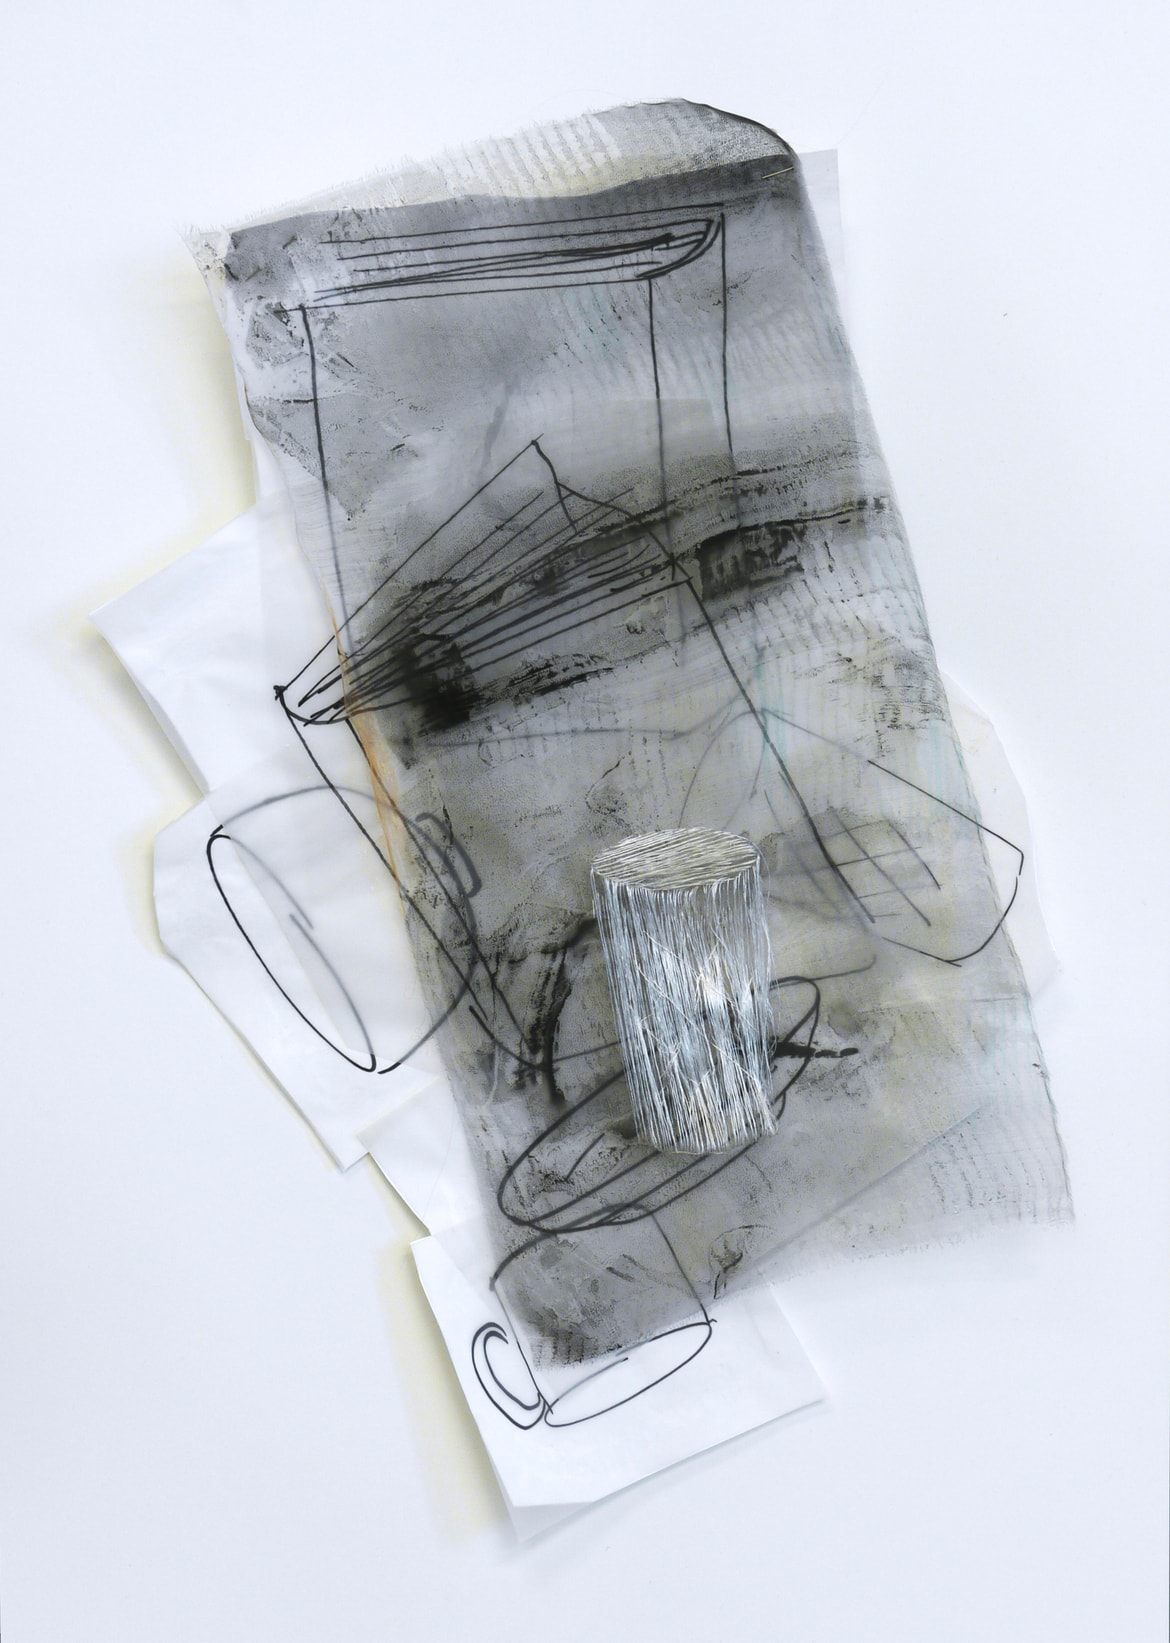 The Time to Stop 2', 2014, Paper, drawing with permanent pen, Italian coloured synthetic cloth, Japanese silk thread, 45 x 61cm